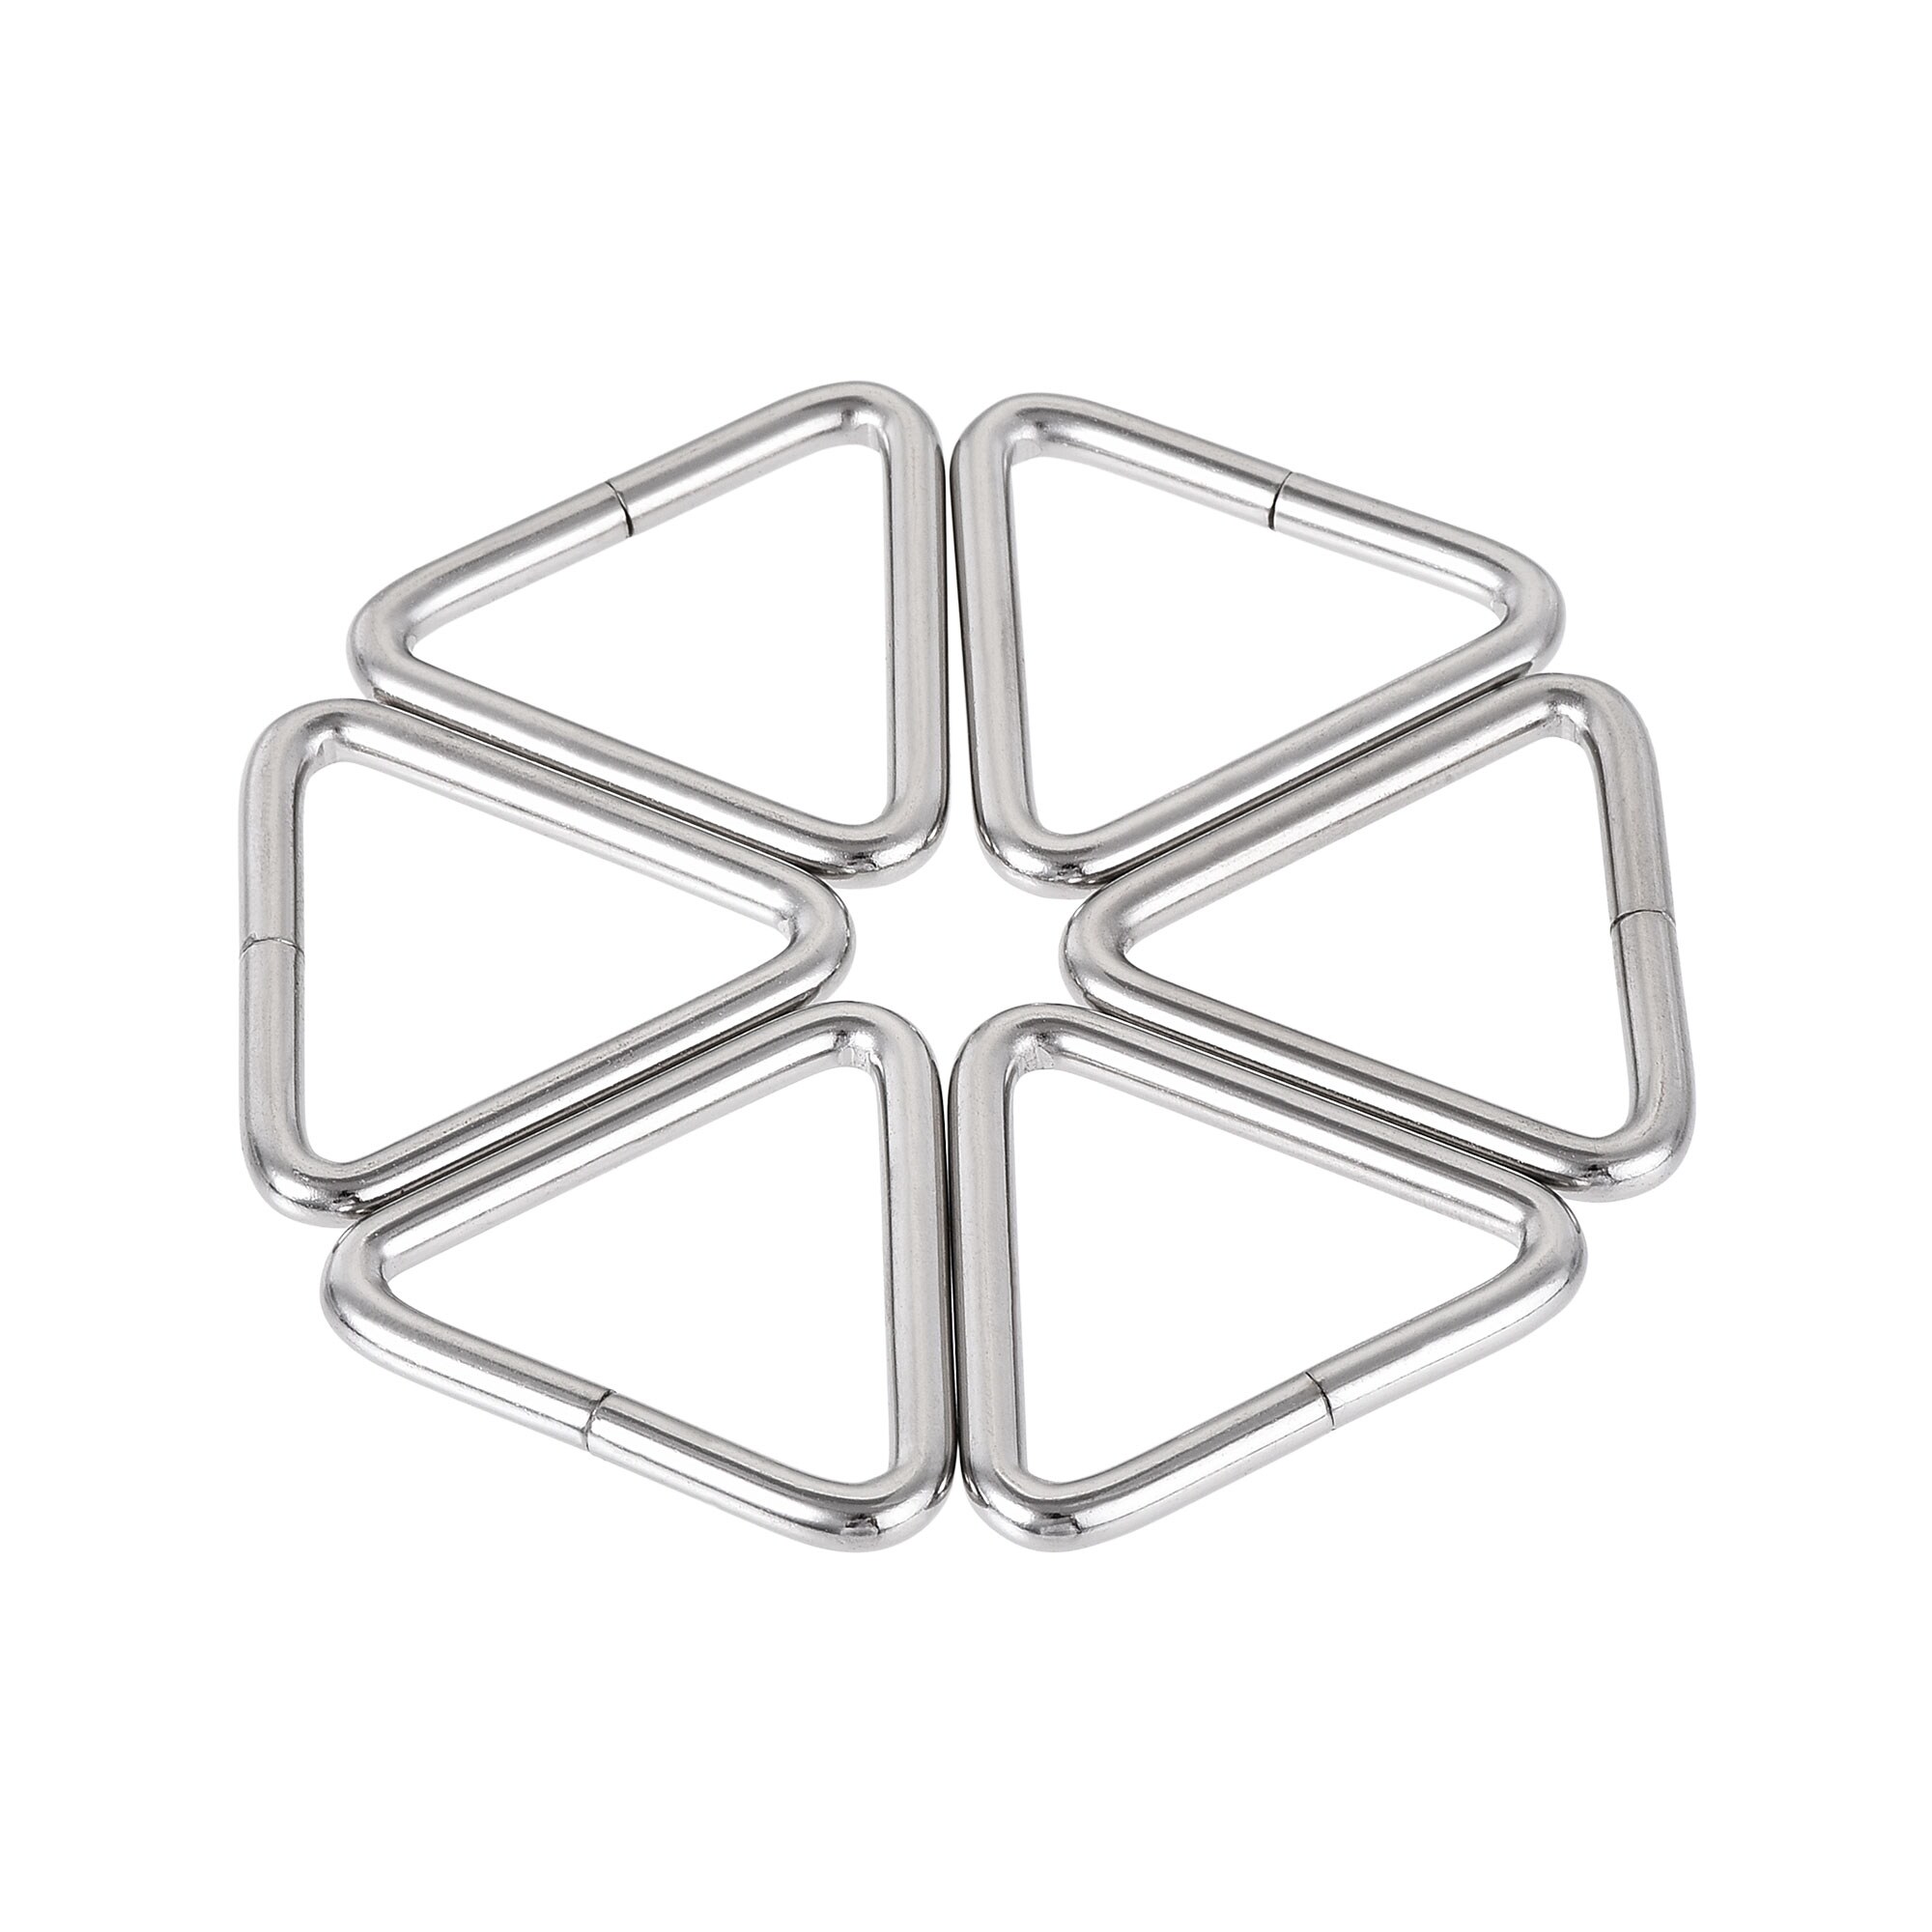 Metal Triangle Ring Buckle 0.98" Inner Width for Strap Craft DIY 30pcs